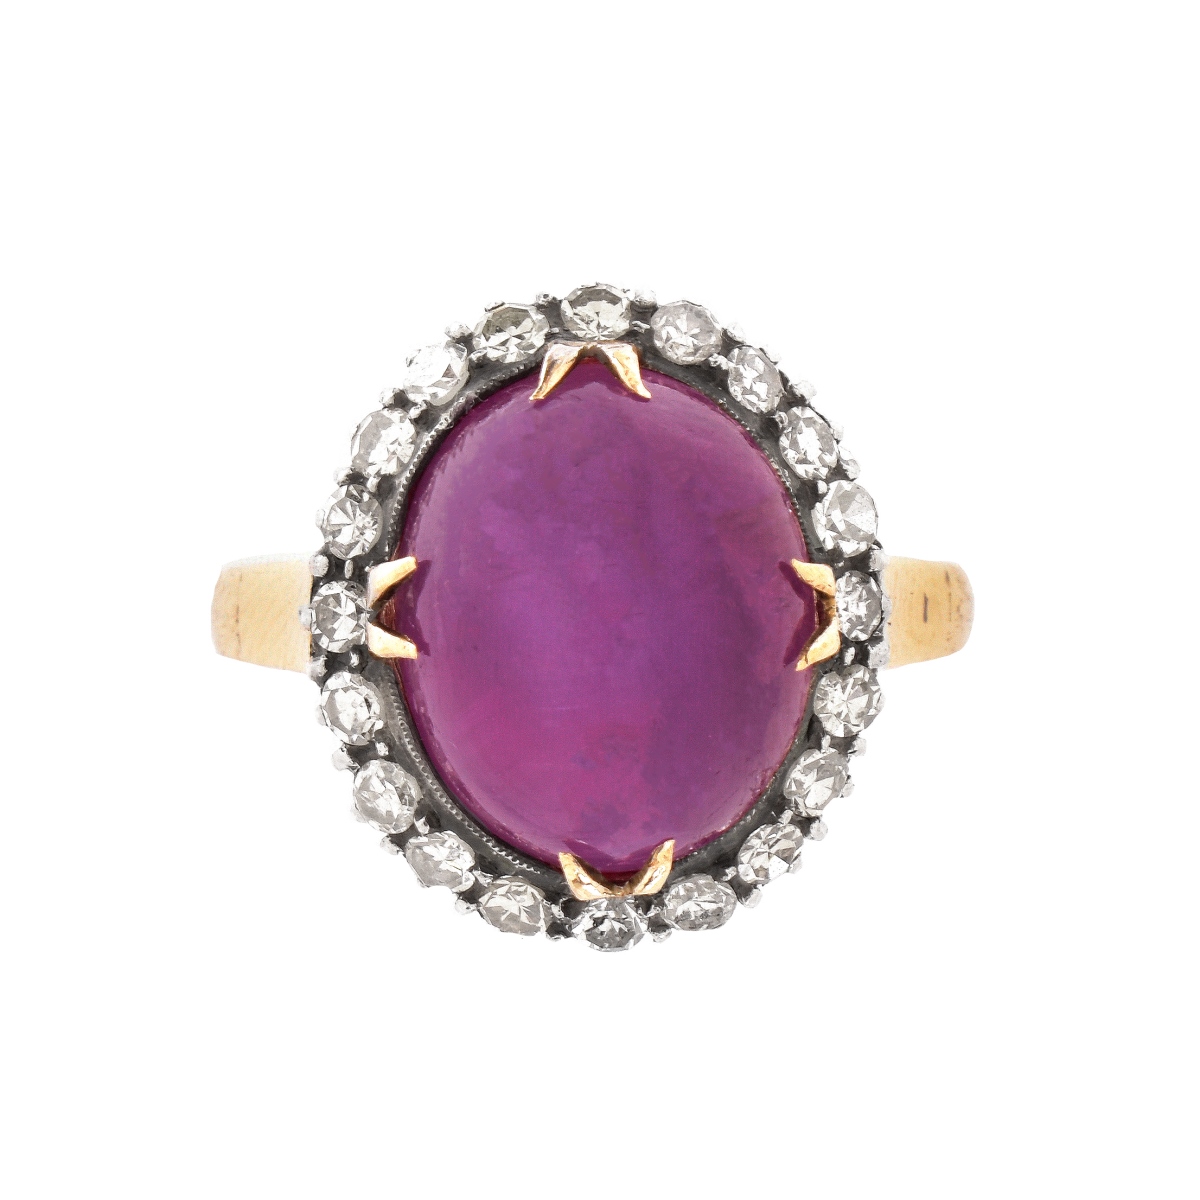 8.32ct Burma Star Ruby and 14K Ring